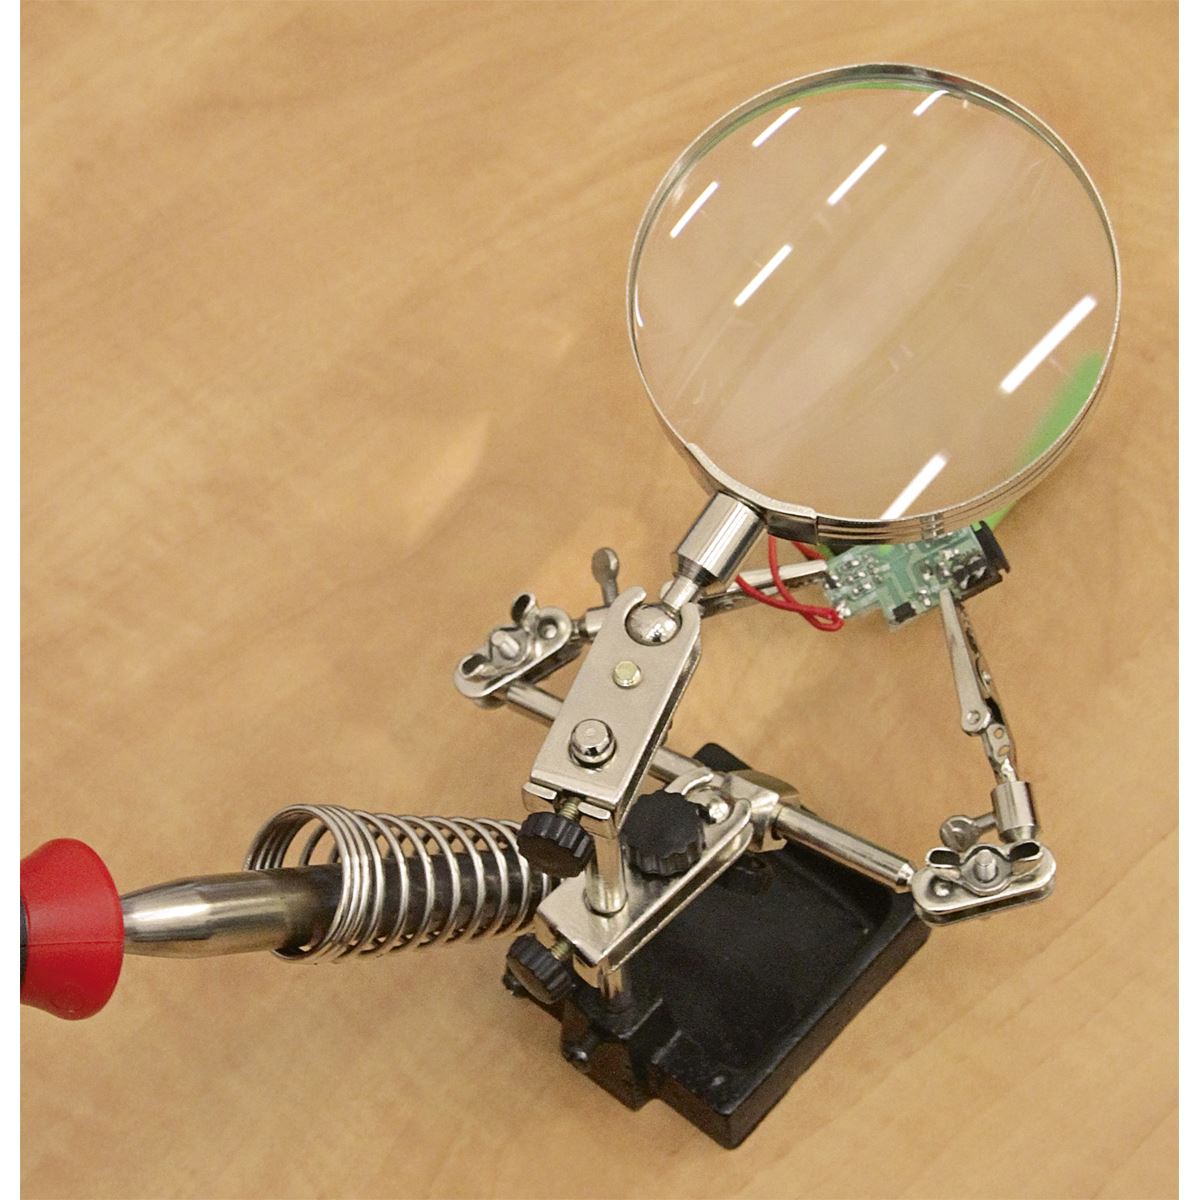 Sealey Mini Robot Soldering Stand with Magnifier & Iron Holder